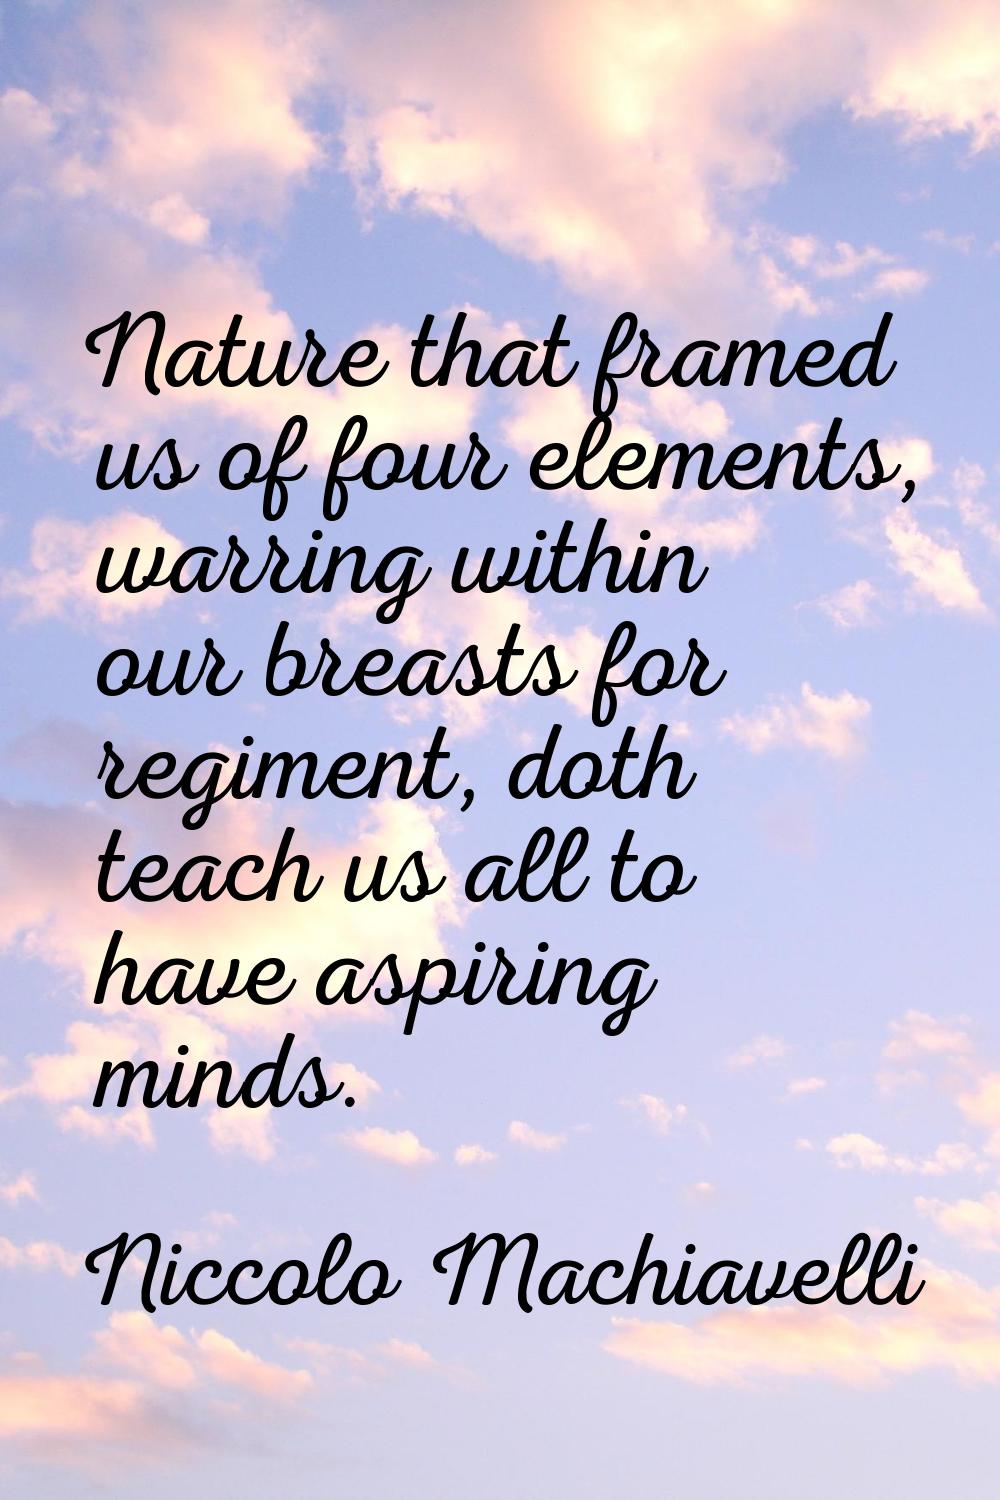 Nature that framed us of four elements, warring within our breasts for regiment, doth teach us all 